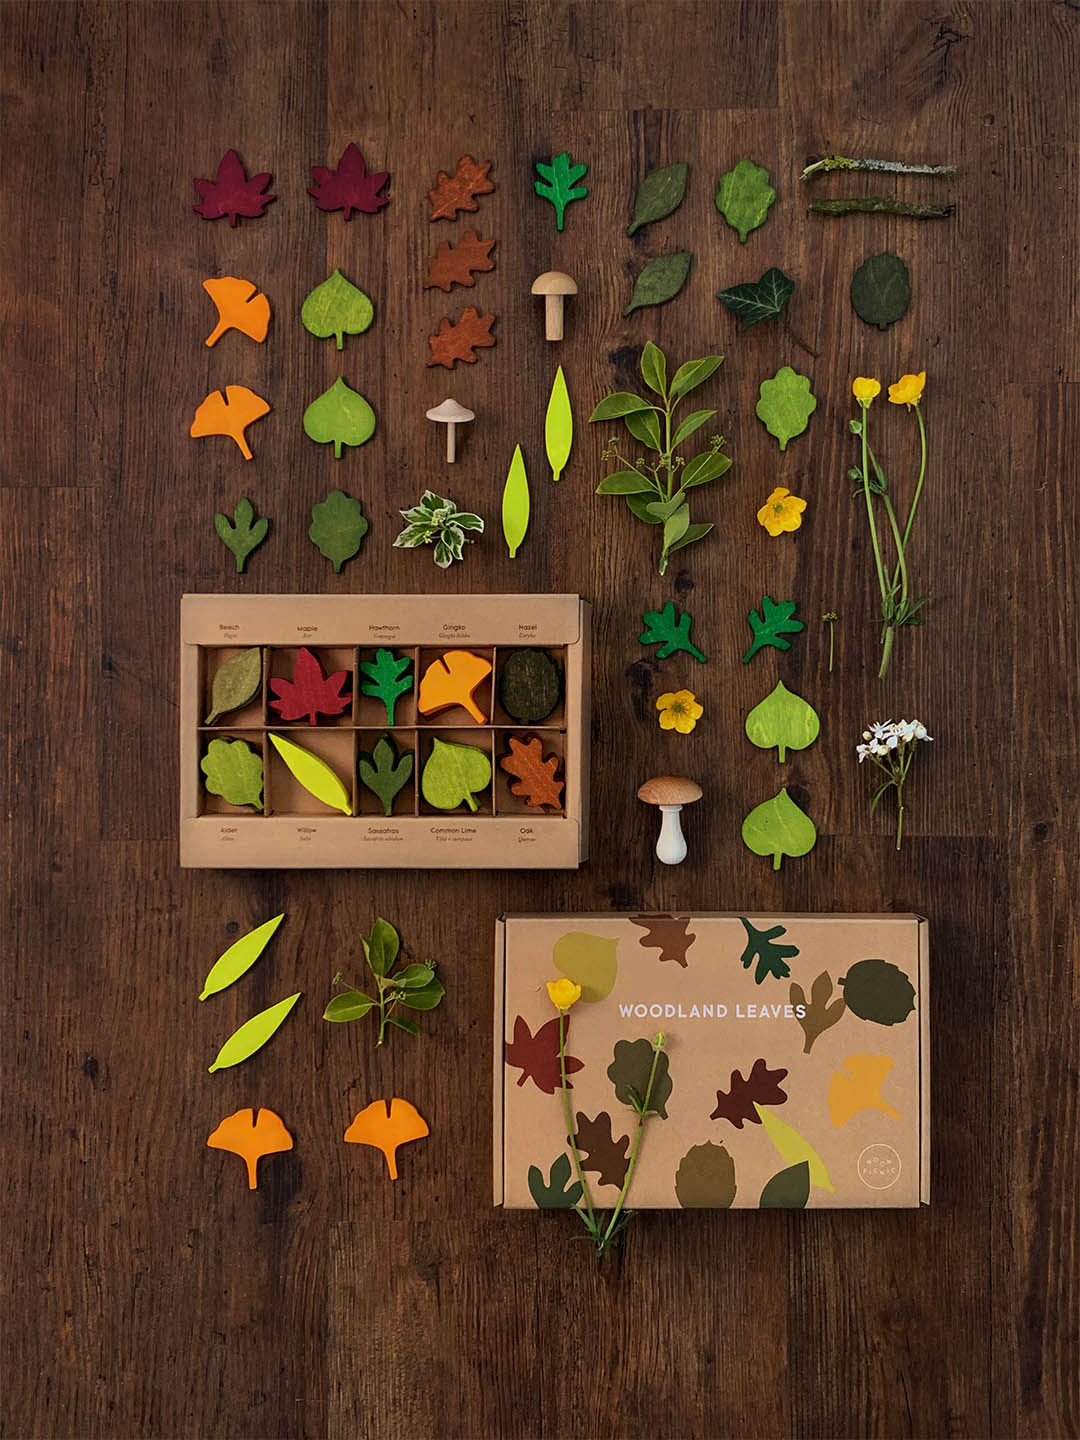 Woodland Leaves in a Box